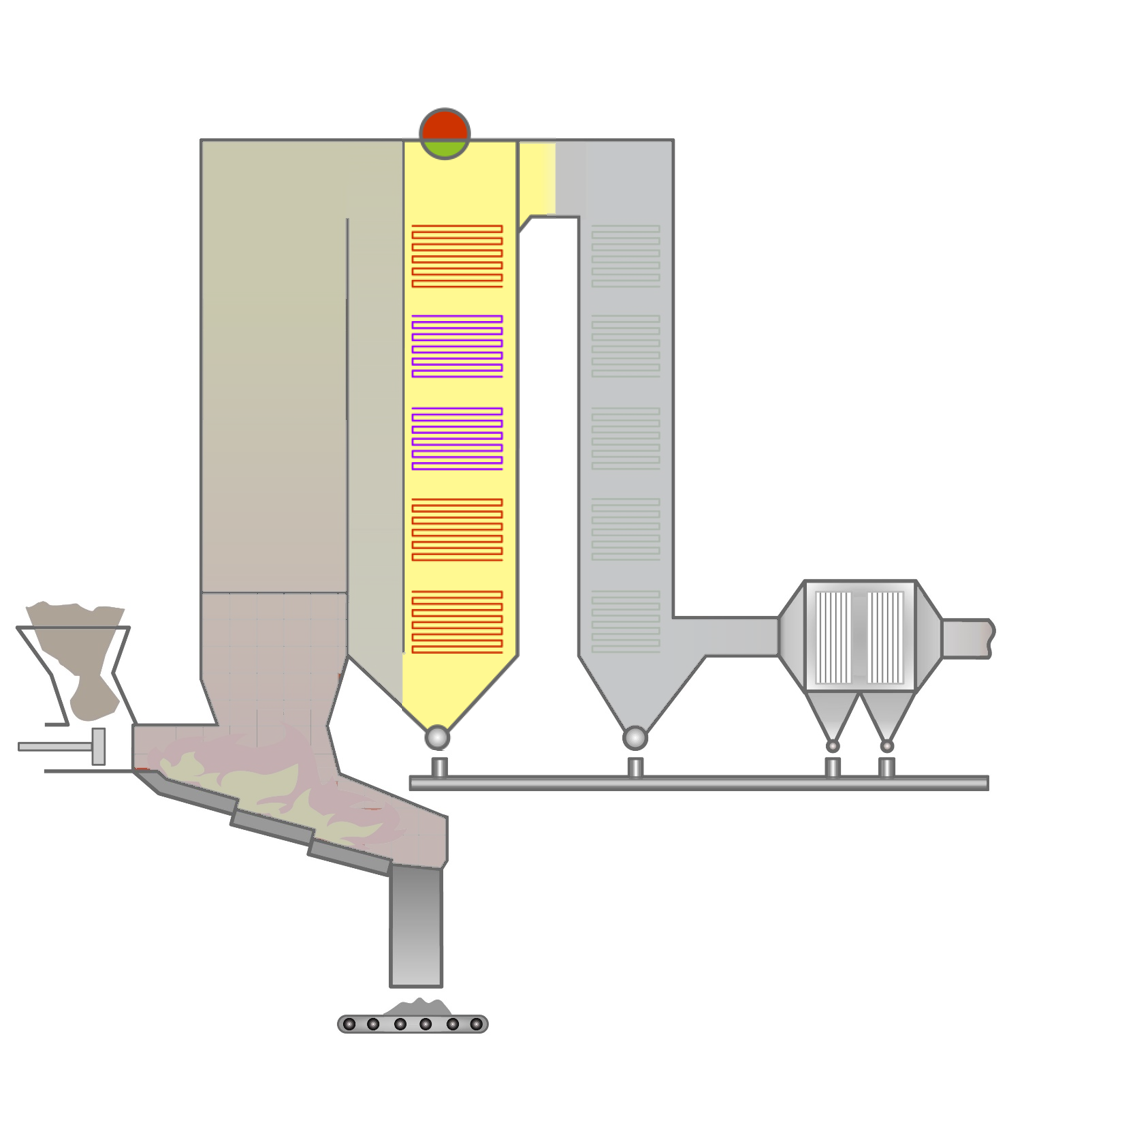 Superheater/Reheater in Vertical type waste incineration boilers